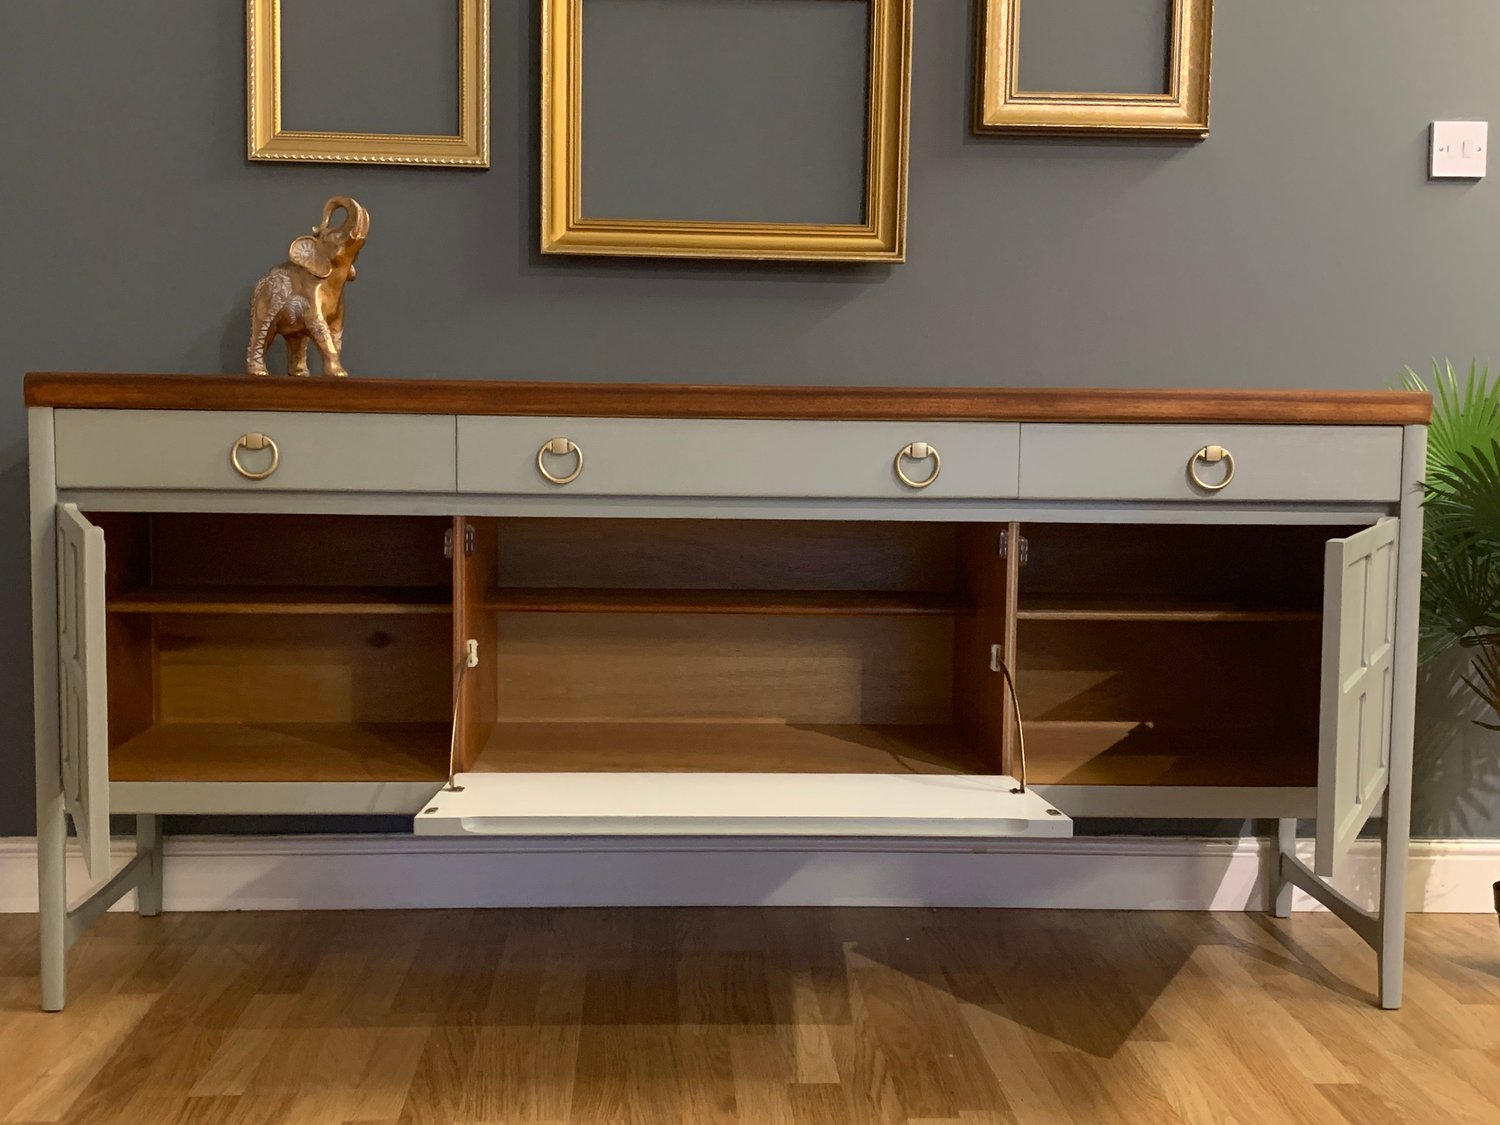 Image of Farrow & balls “Pigeon” Nathan sideboard with naked top